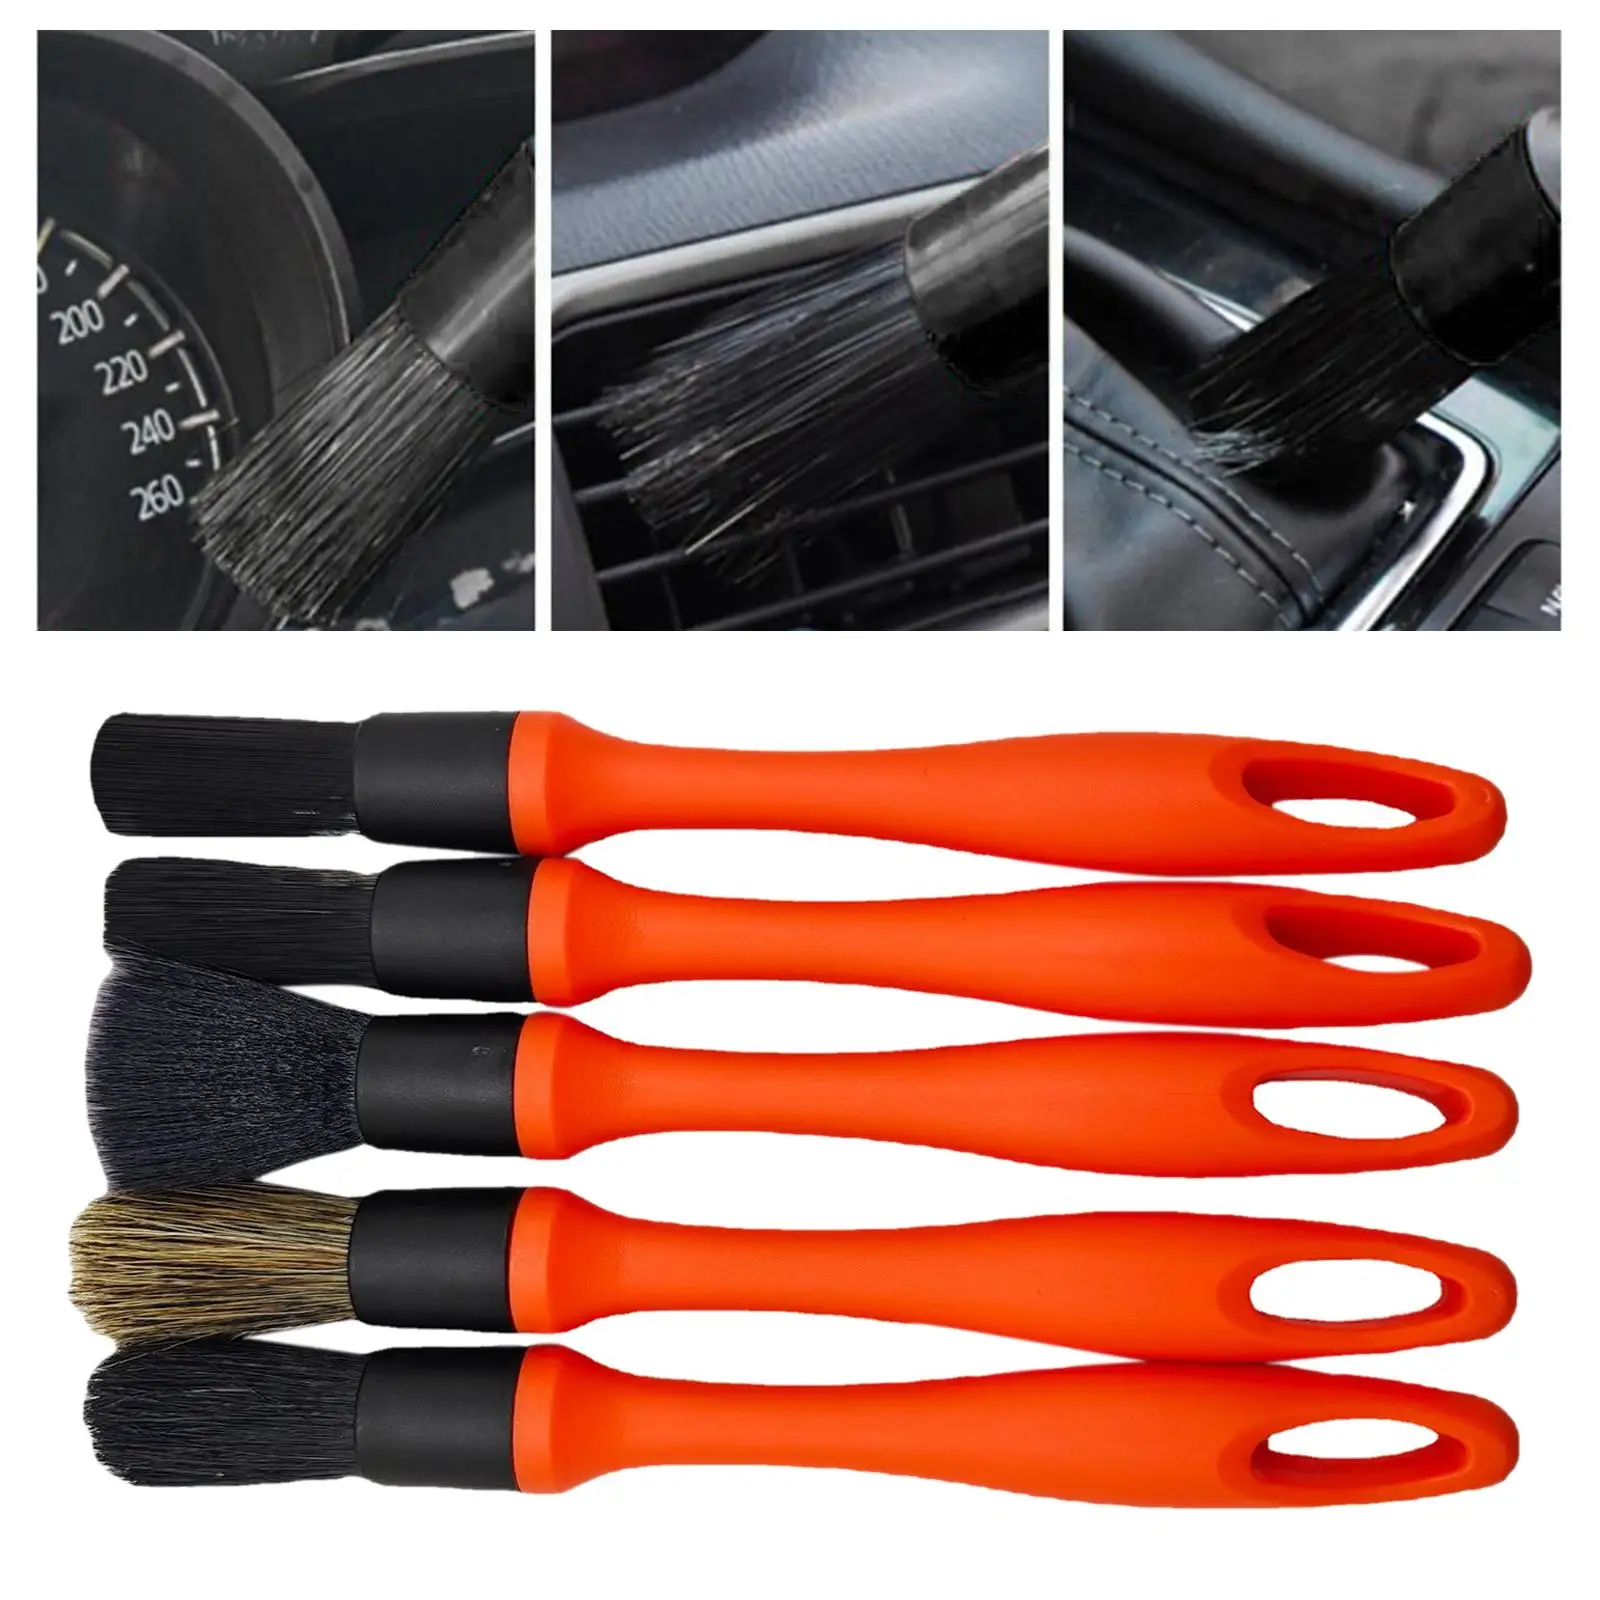 5x Car Interior Cleaning Brush Replaceable Detail Dust Brush for Wheel Cleaning Engine Console Exterior Vehicle Exterior